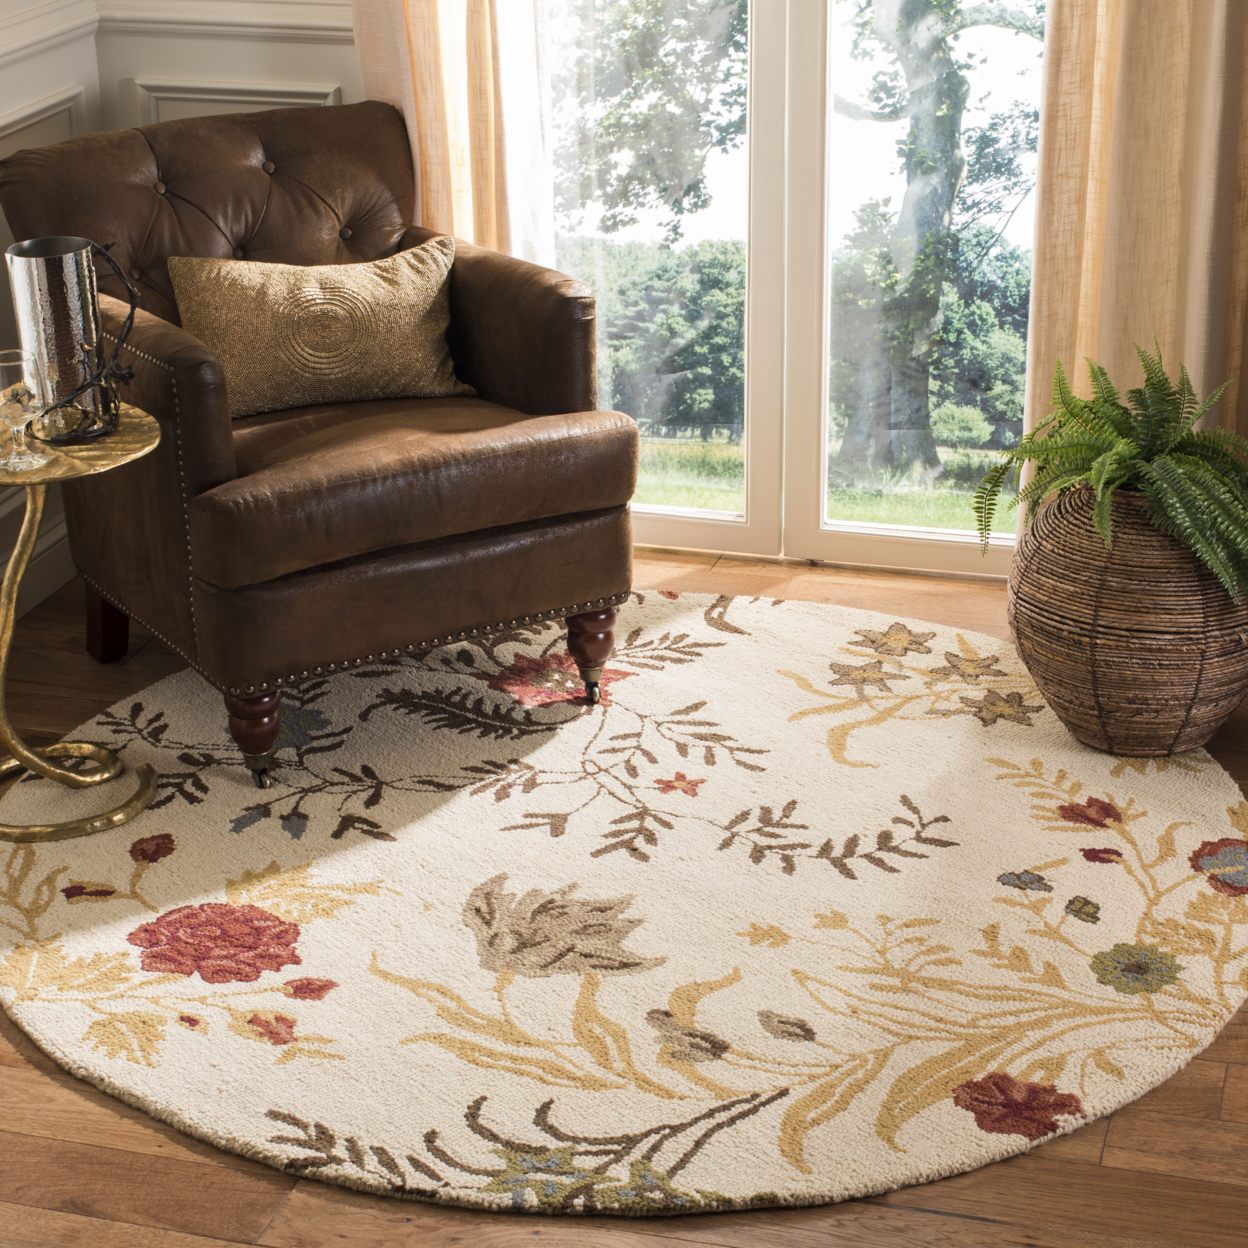 SAFAVIEH Blossom BLM916A Hand-hooked Beige / Multi Rug - 5' X 8'